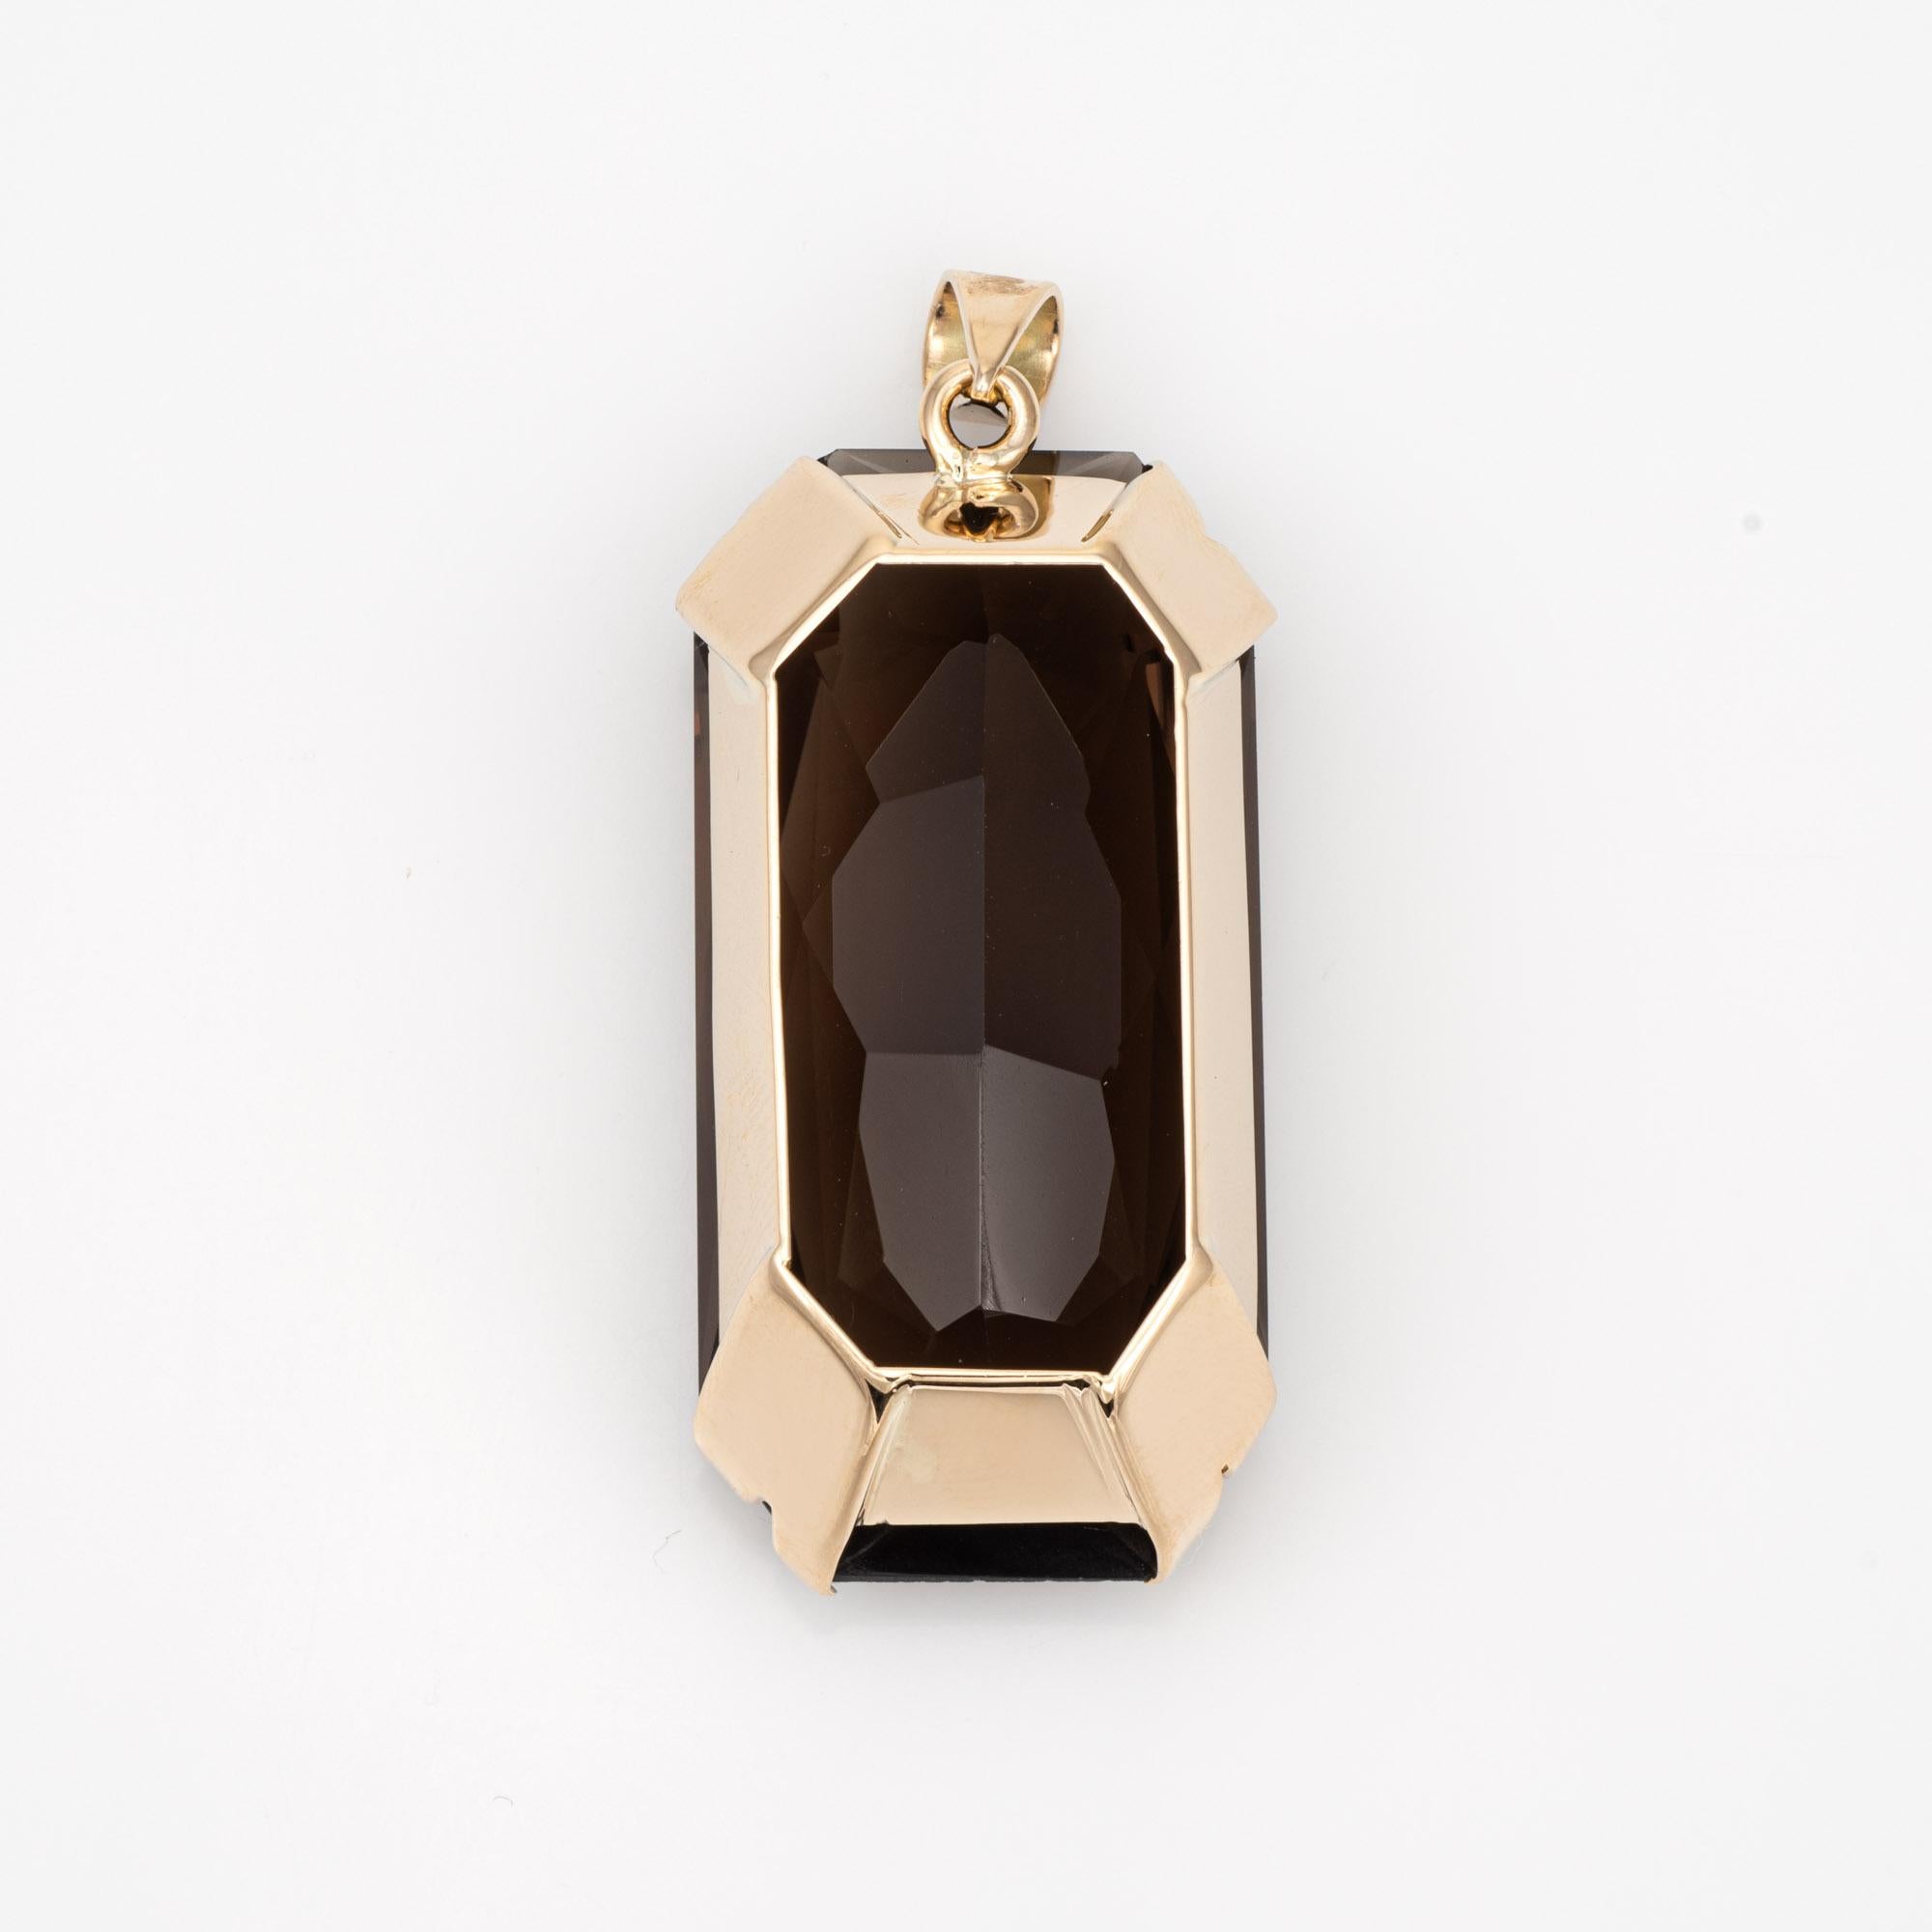 Finely detailed vintage smoky quartz pendant crafted in 14k yellow gold (circa 1960s to 1970s).

Elongated square cut smoky quartz measures 39mm x 19mm (estimated at 63 carats). The quartz is in very good condition and free of cracks or chips.
 
The